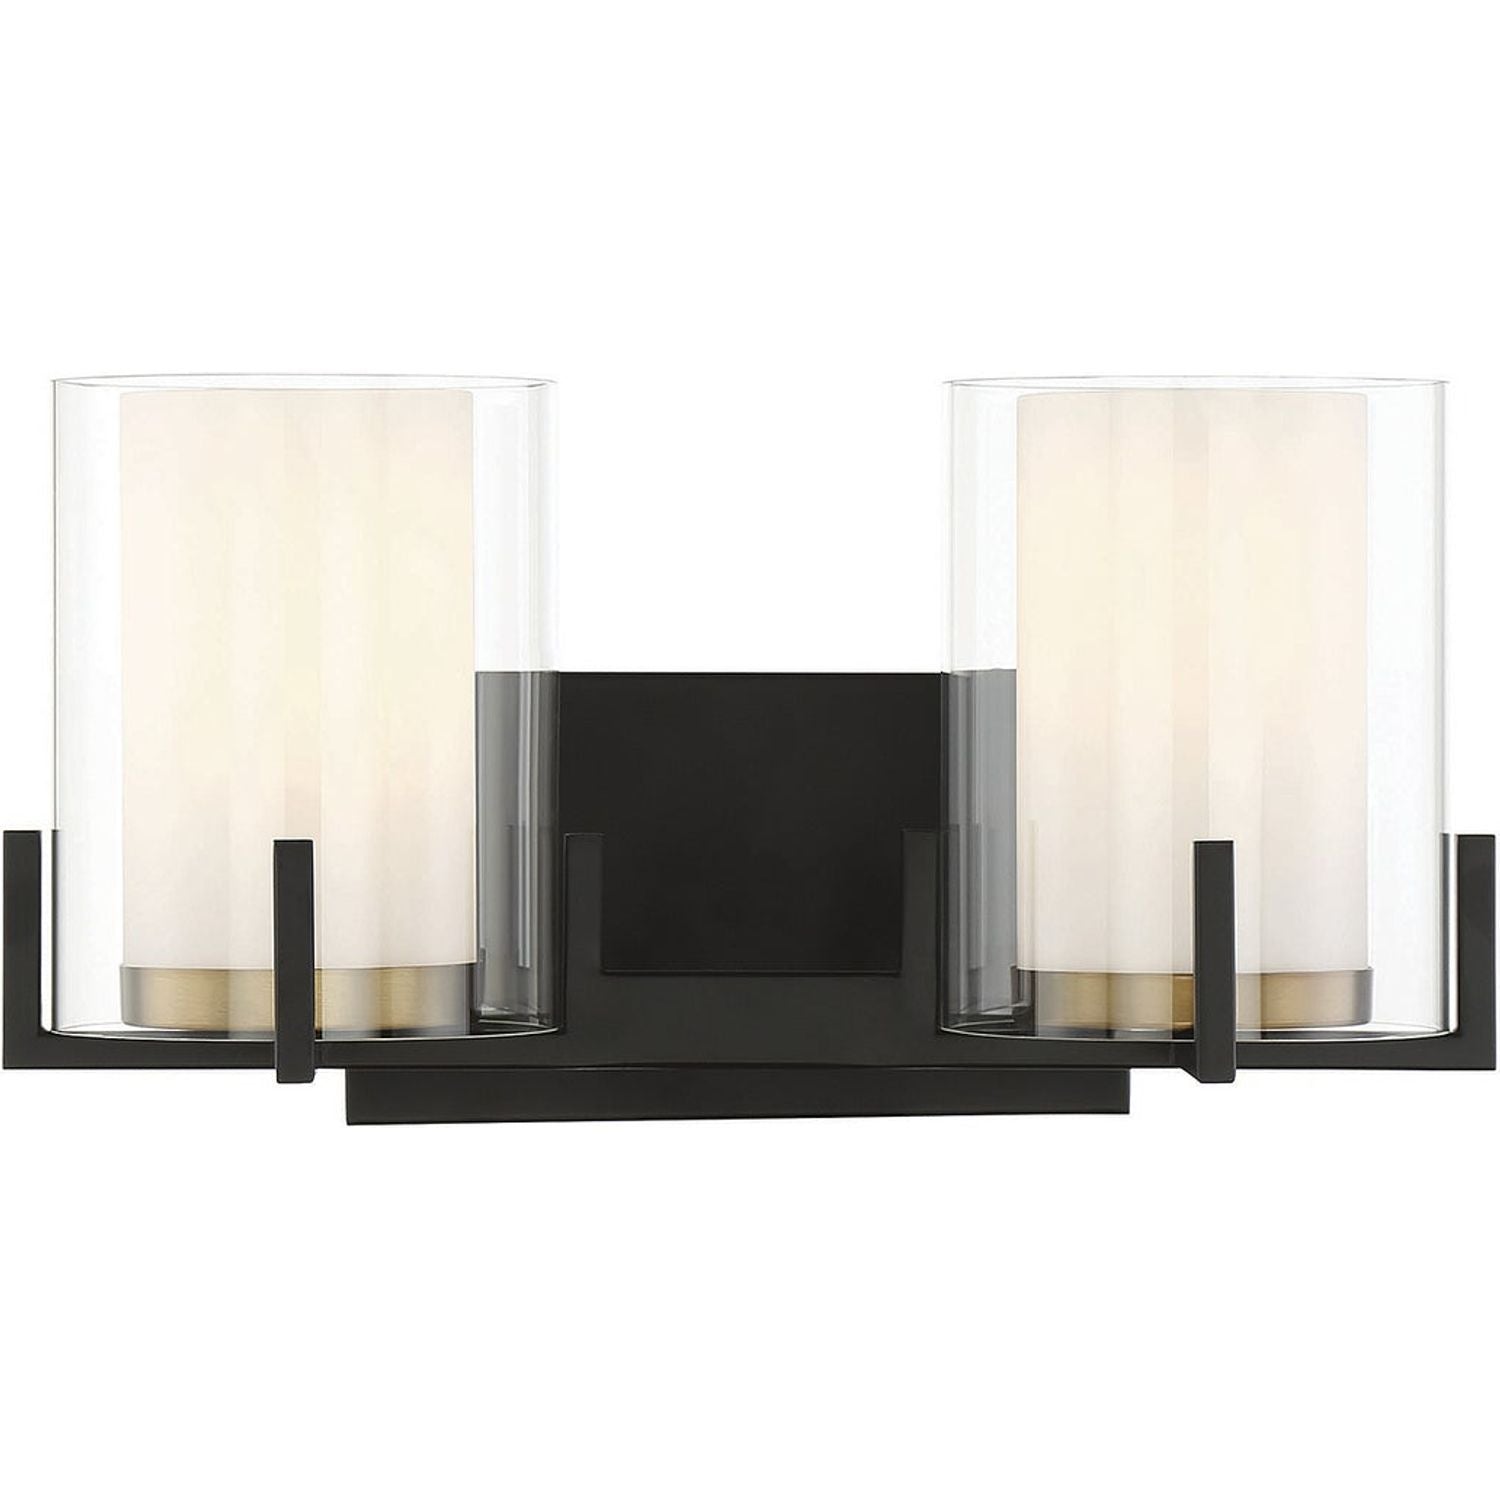 Savoy House - 8-1977-2-143 - Two Light Bathroom Vanity - Eaton - Matte Black with Warm Brass Accents